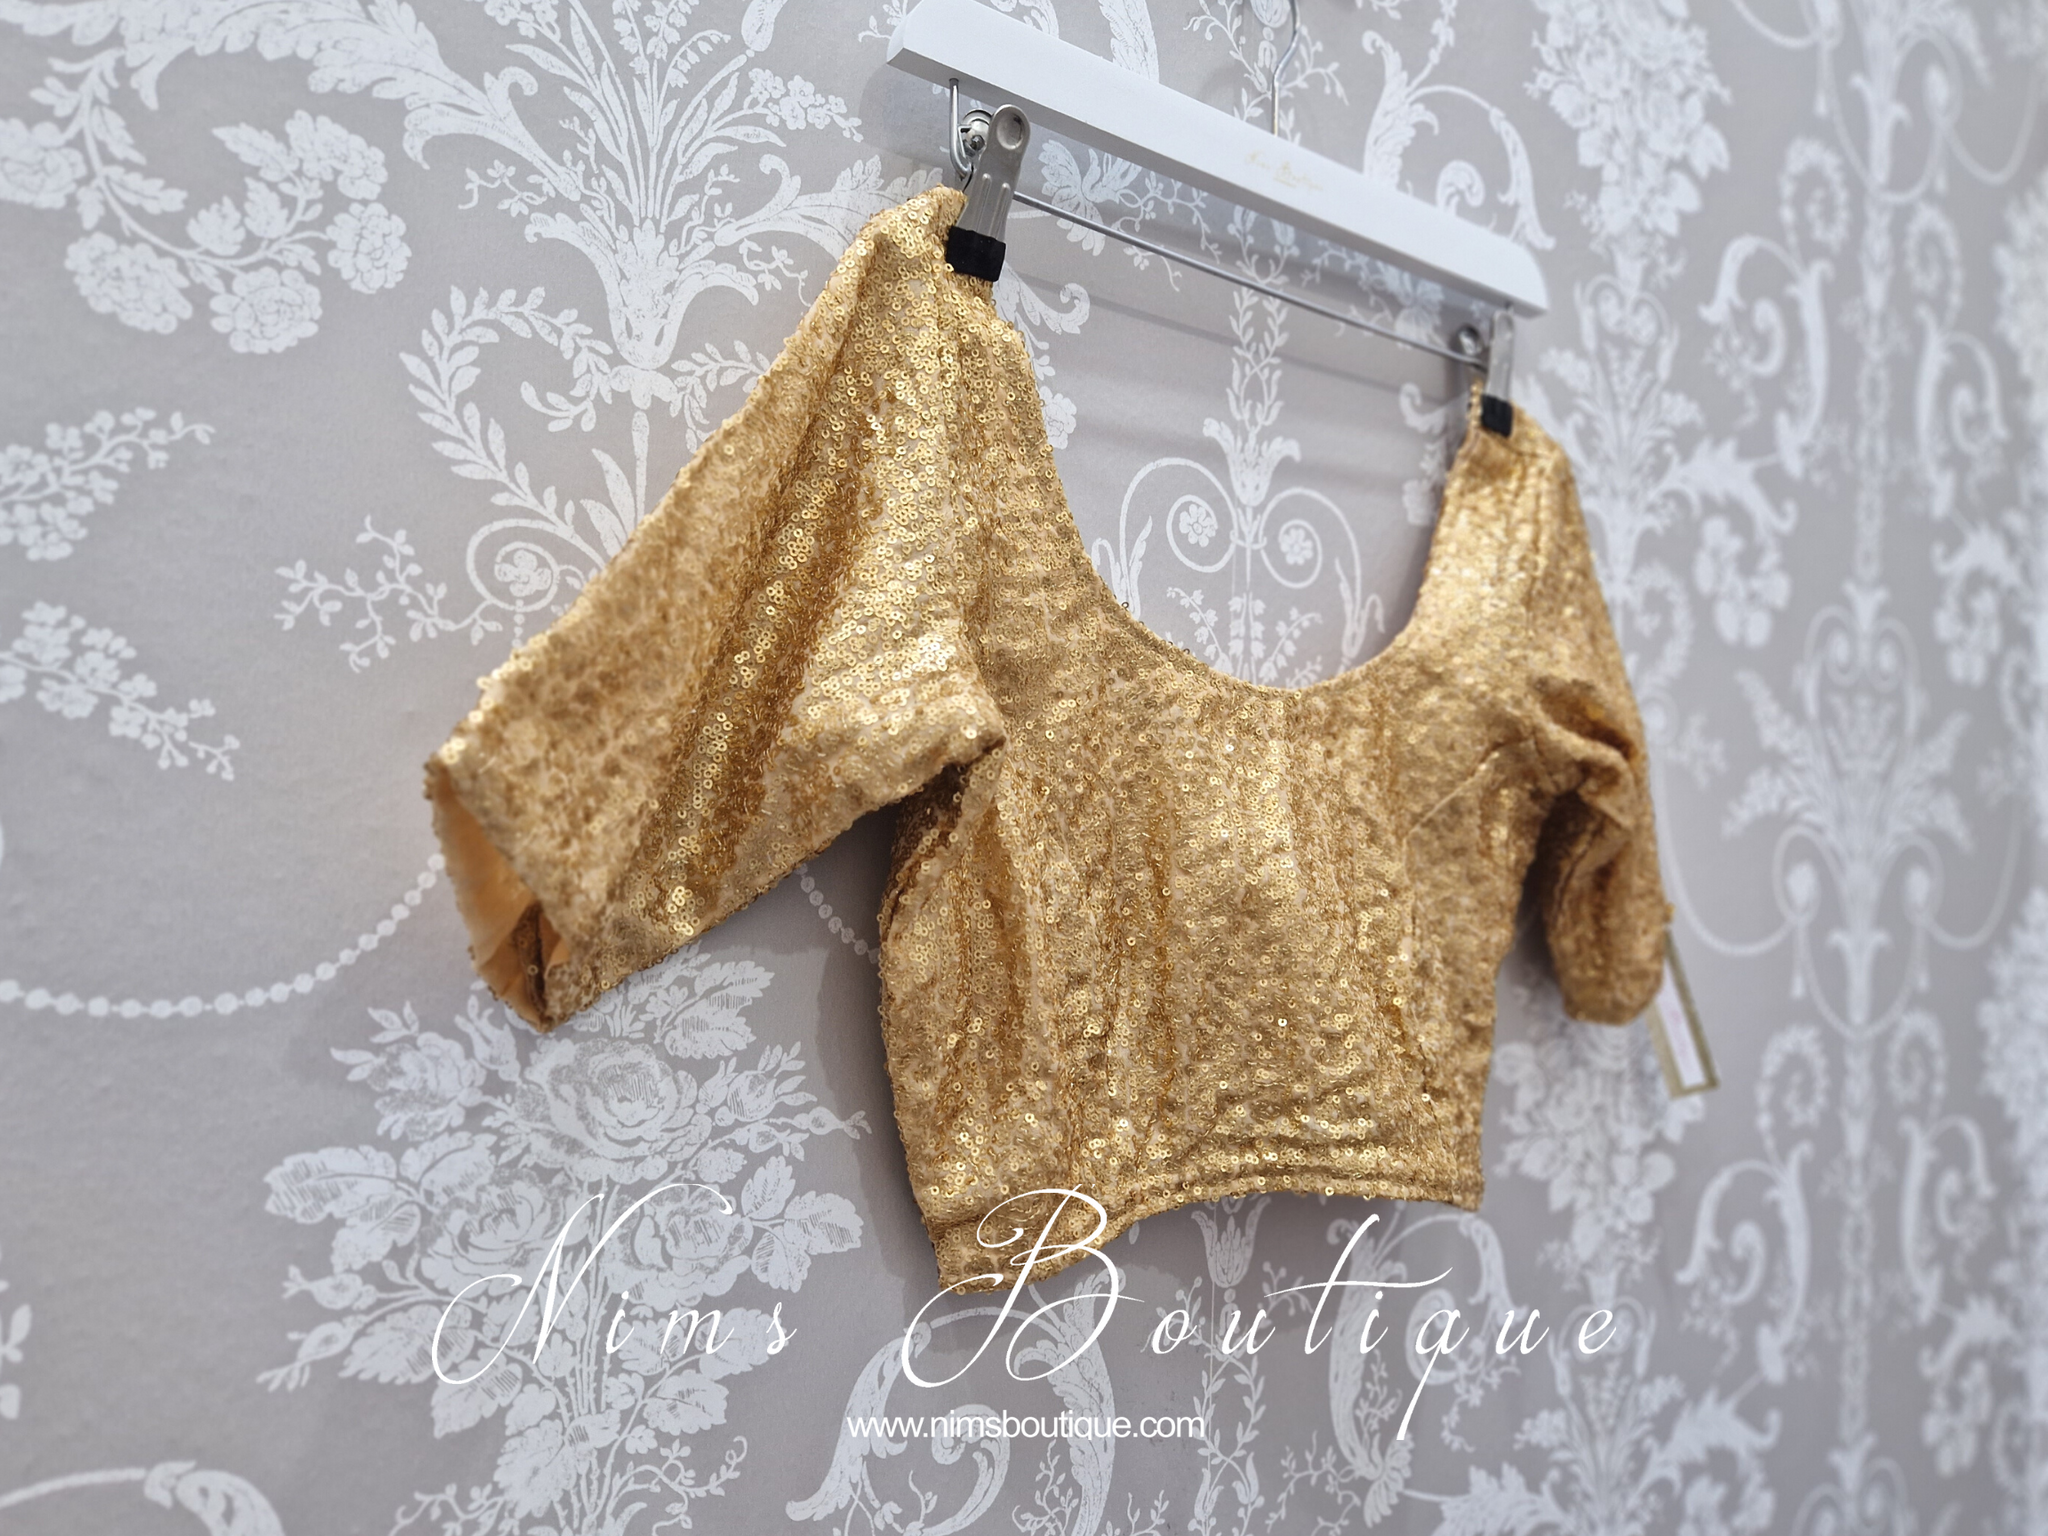 Gold Sequin Half Sleeve Blouse (size 6-20)